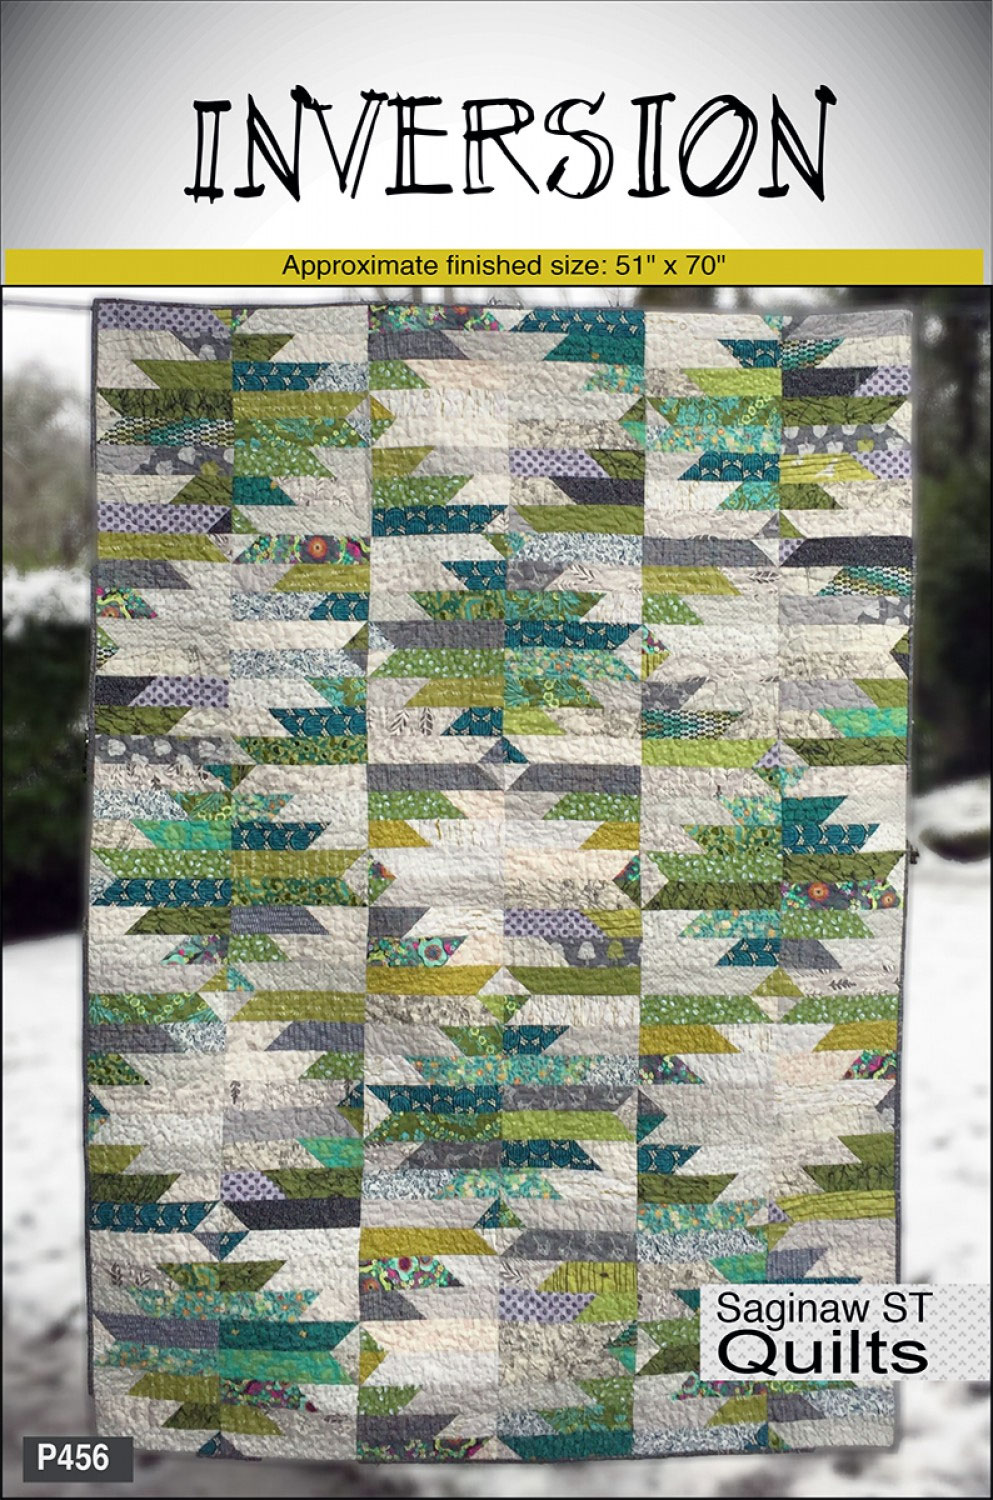 Inversion-quilt-sewing-pattern-Saginaw-st-quilts-front